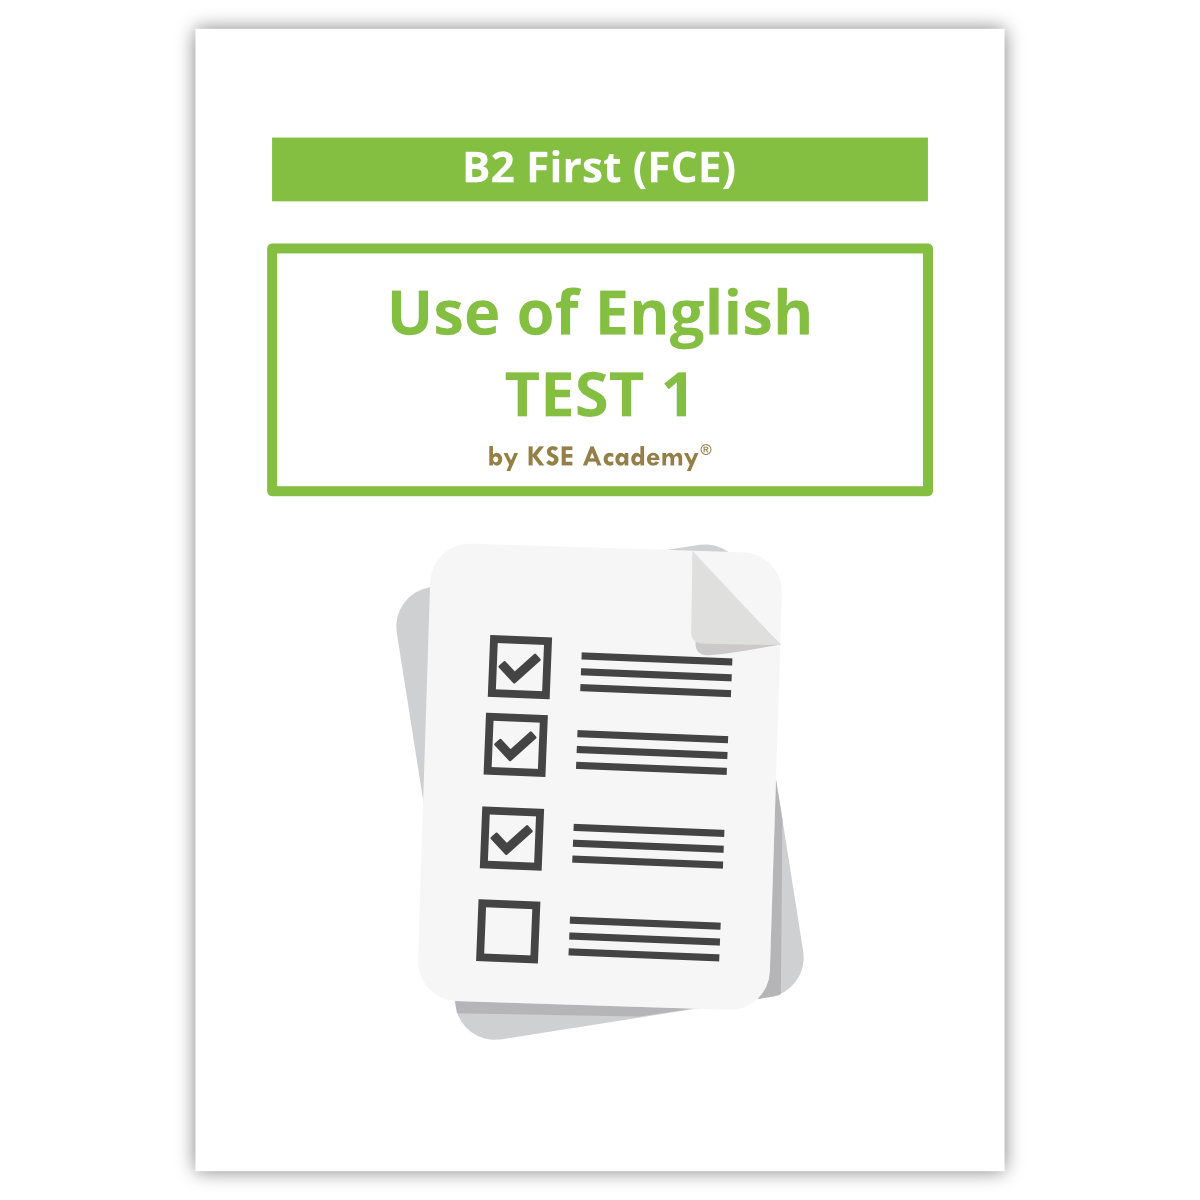 B2 Fce Use Of English Test 1 Cover